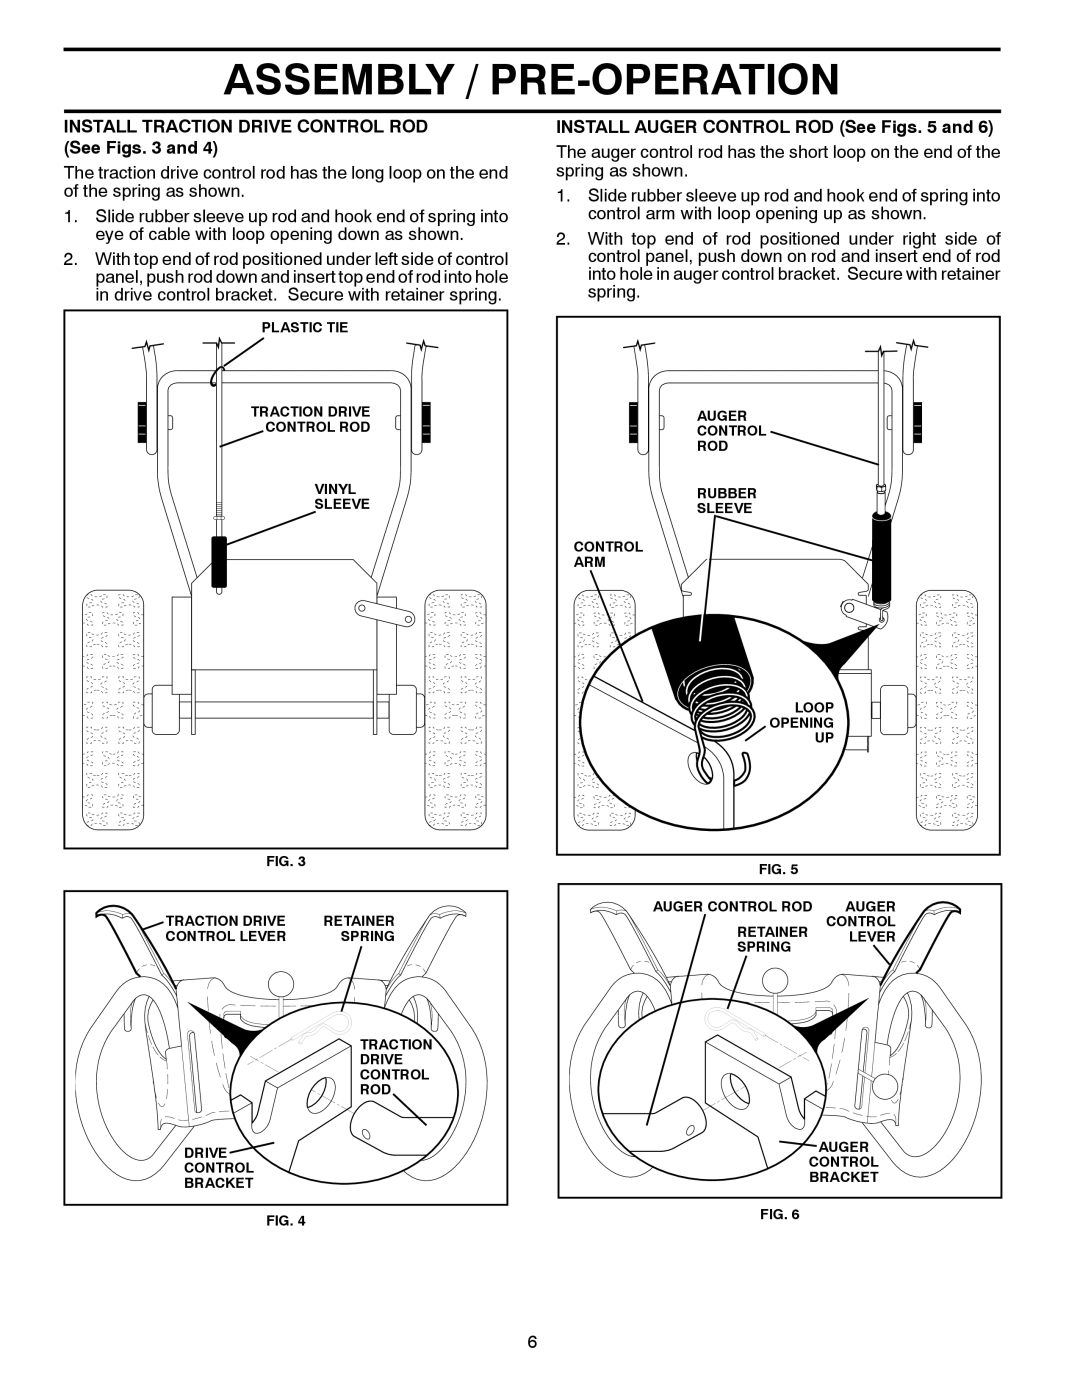 Husqvarna 13524SB-XLS owner manual Assembly / Pre-Operation, INSTALL AUGER CONTROL ROD See Figs. 5 and 